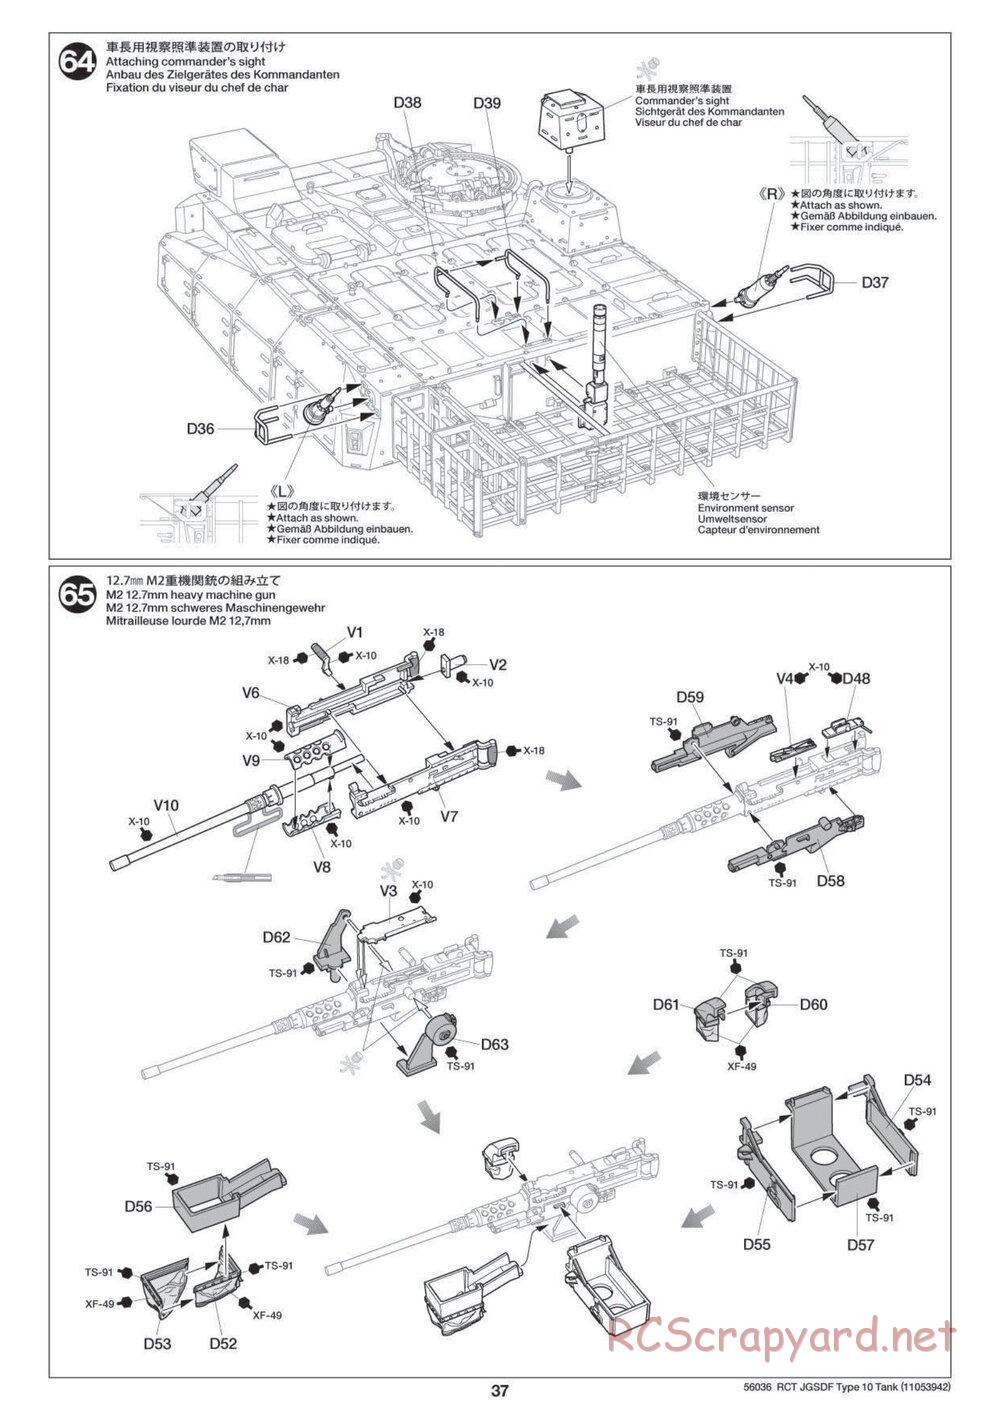 Tamiya - JGSDF Type 10 Tank - 1/16 Scale Chassis - Manual - Page 37